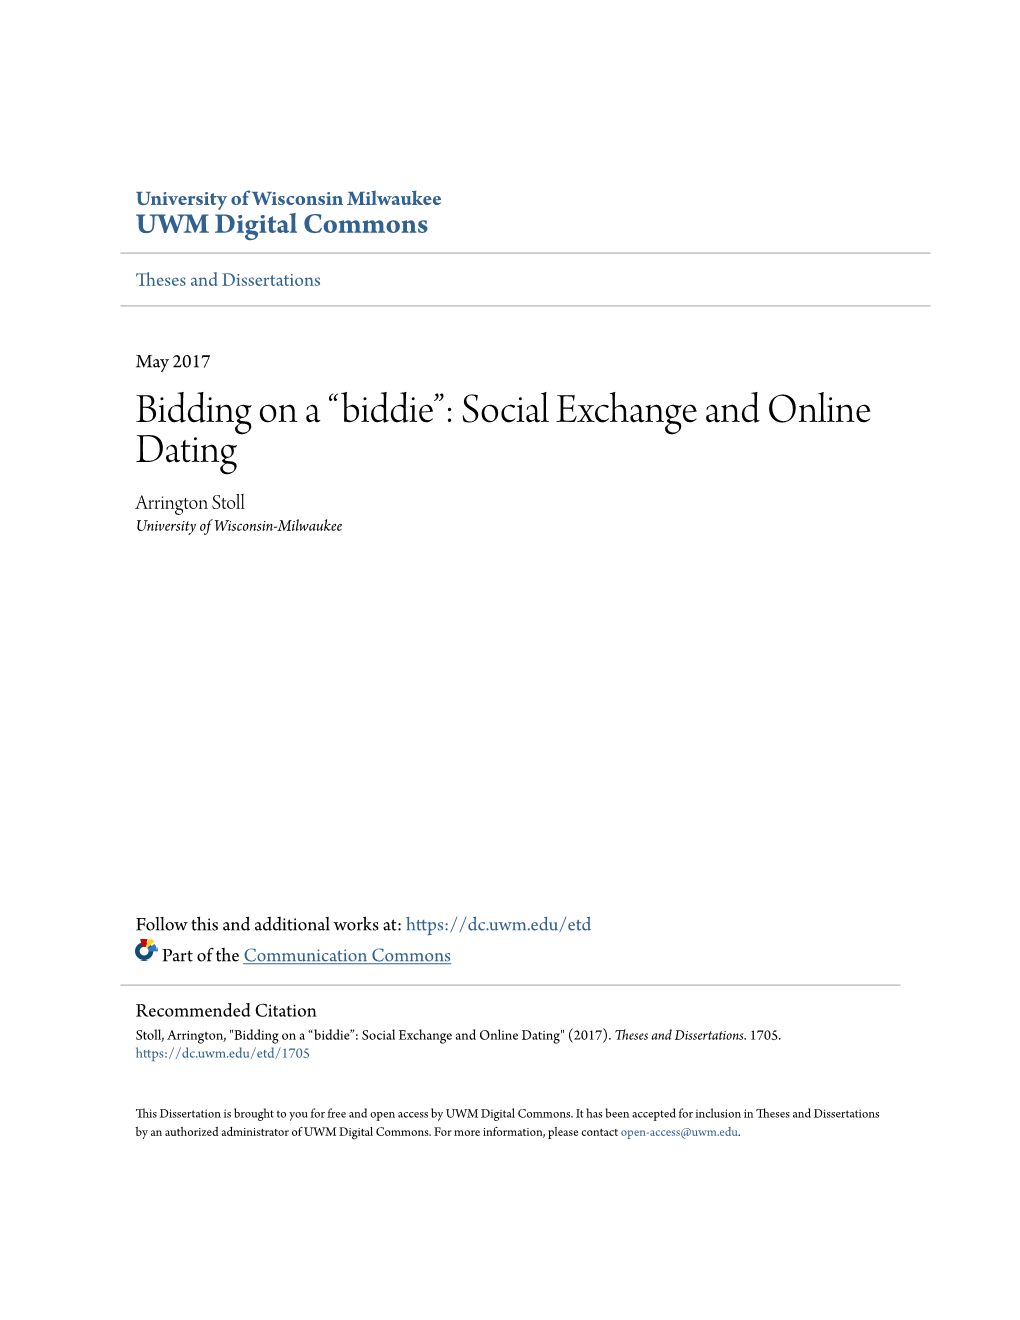 Bidding on a “Biddie”: Social Exchange and Online Dating Arrington Stoll University of Wisconsin-Milwaukee